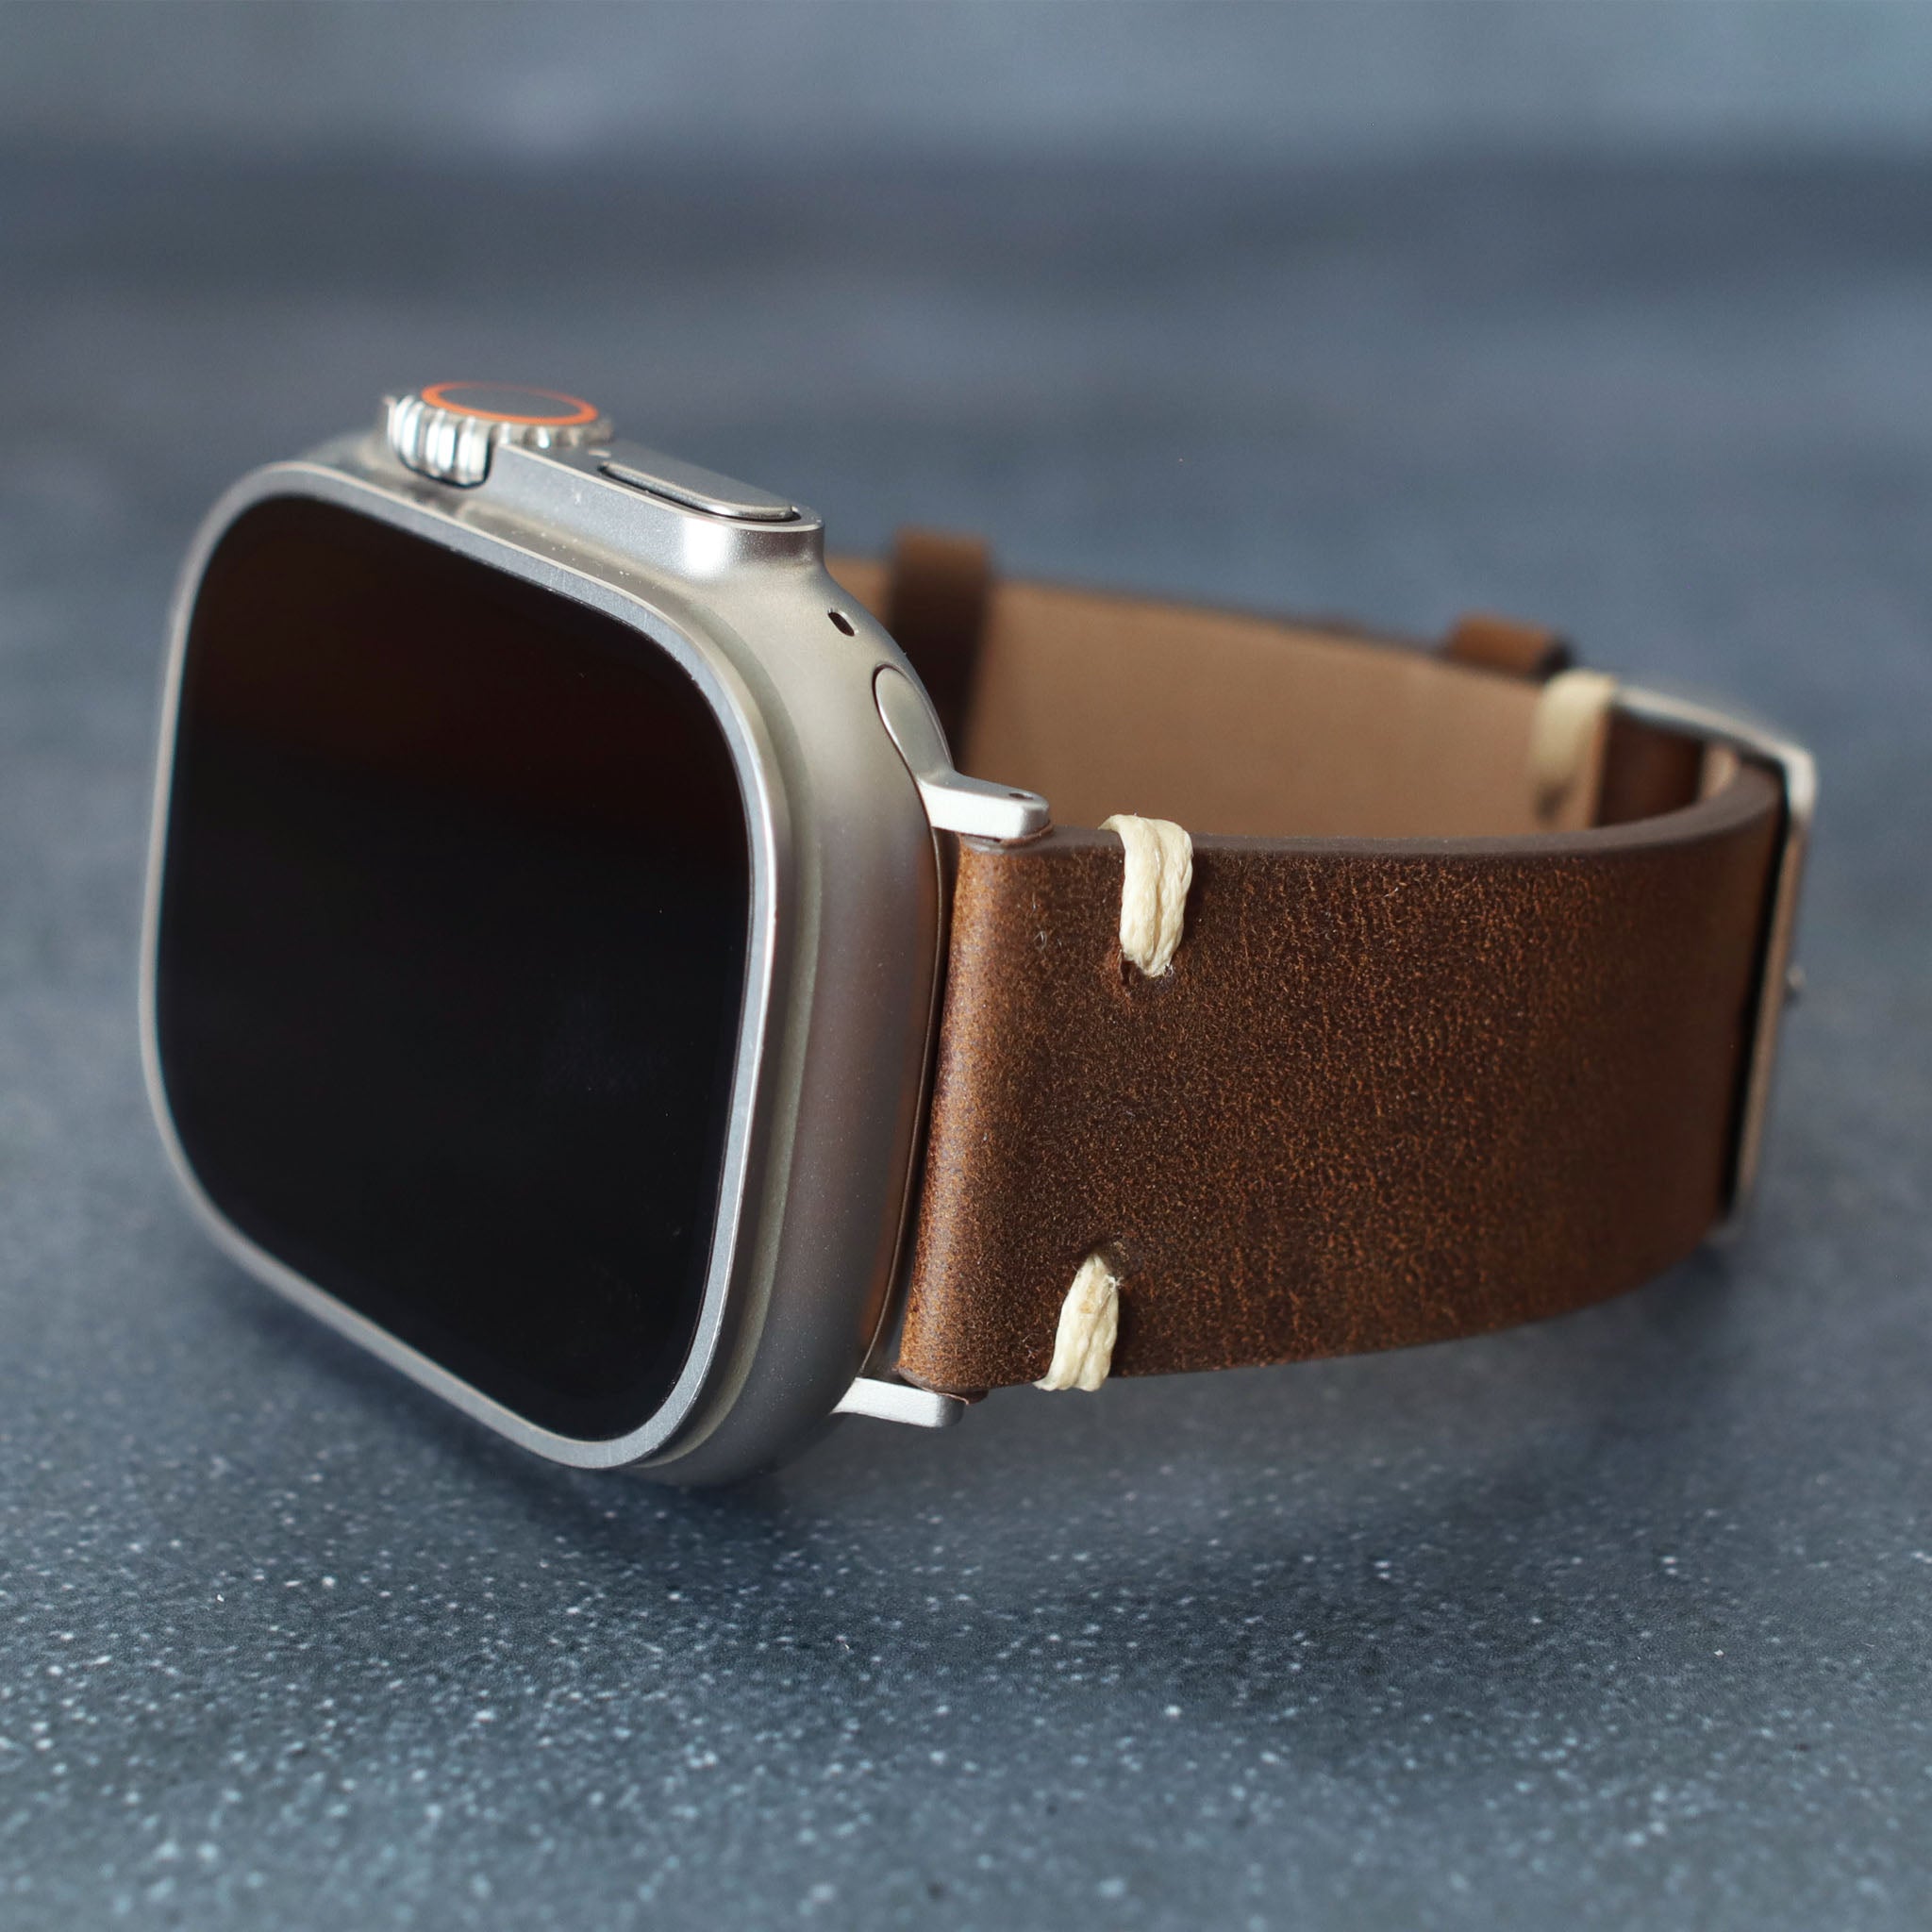 Classic Leather Watch Straps for an Apple Watch